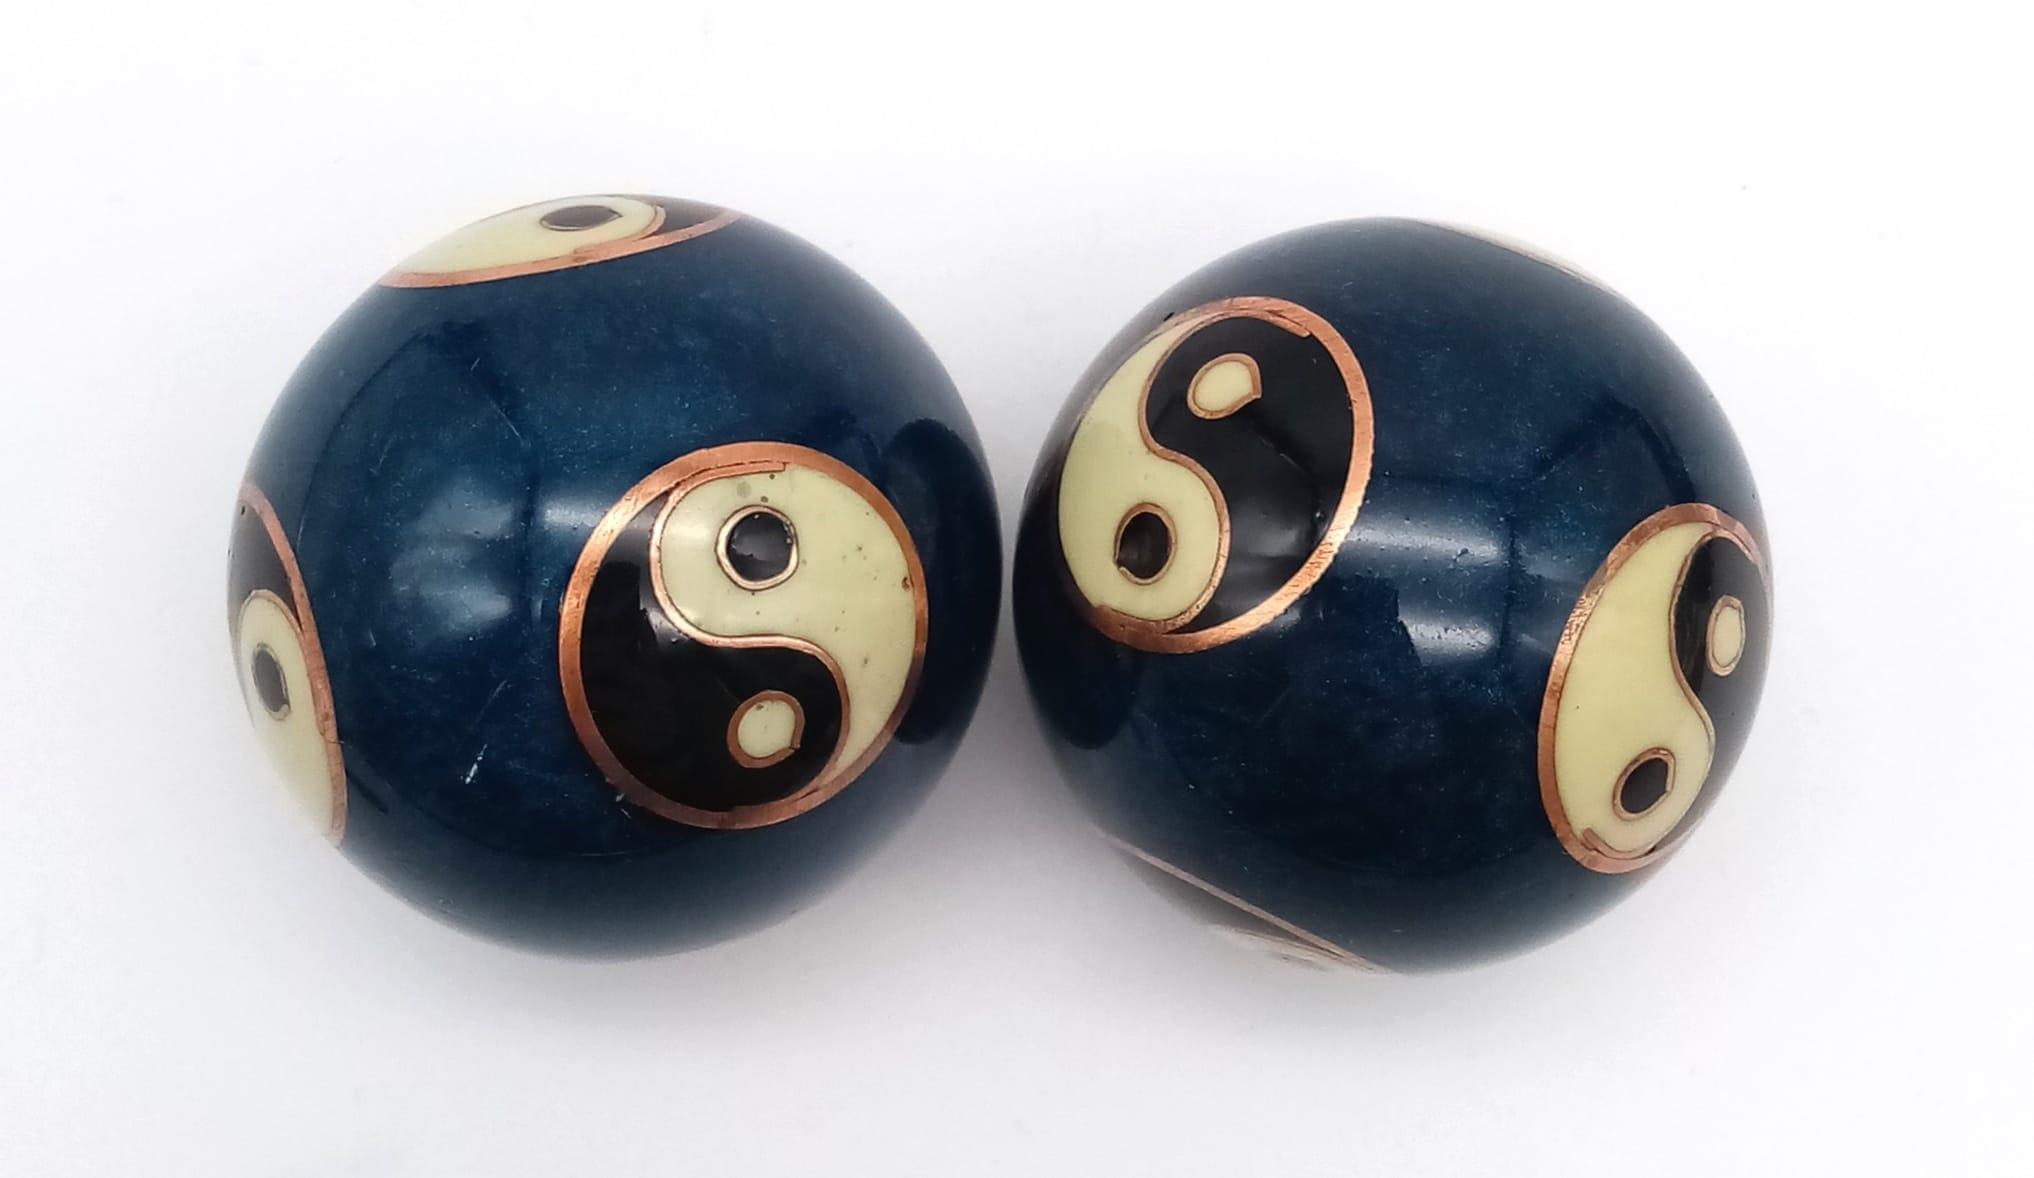 A PAIR OF YING AND YANG STRESS BALLS IN BOX - Image 4 of 7